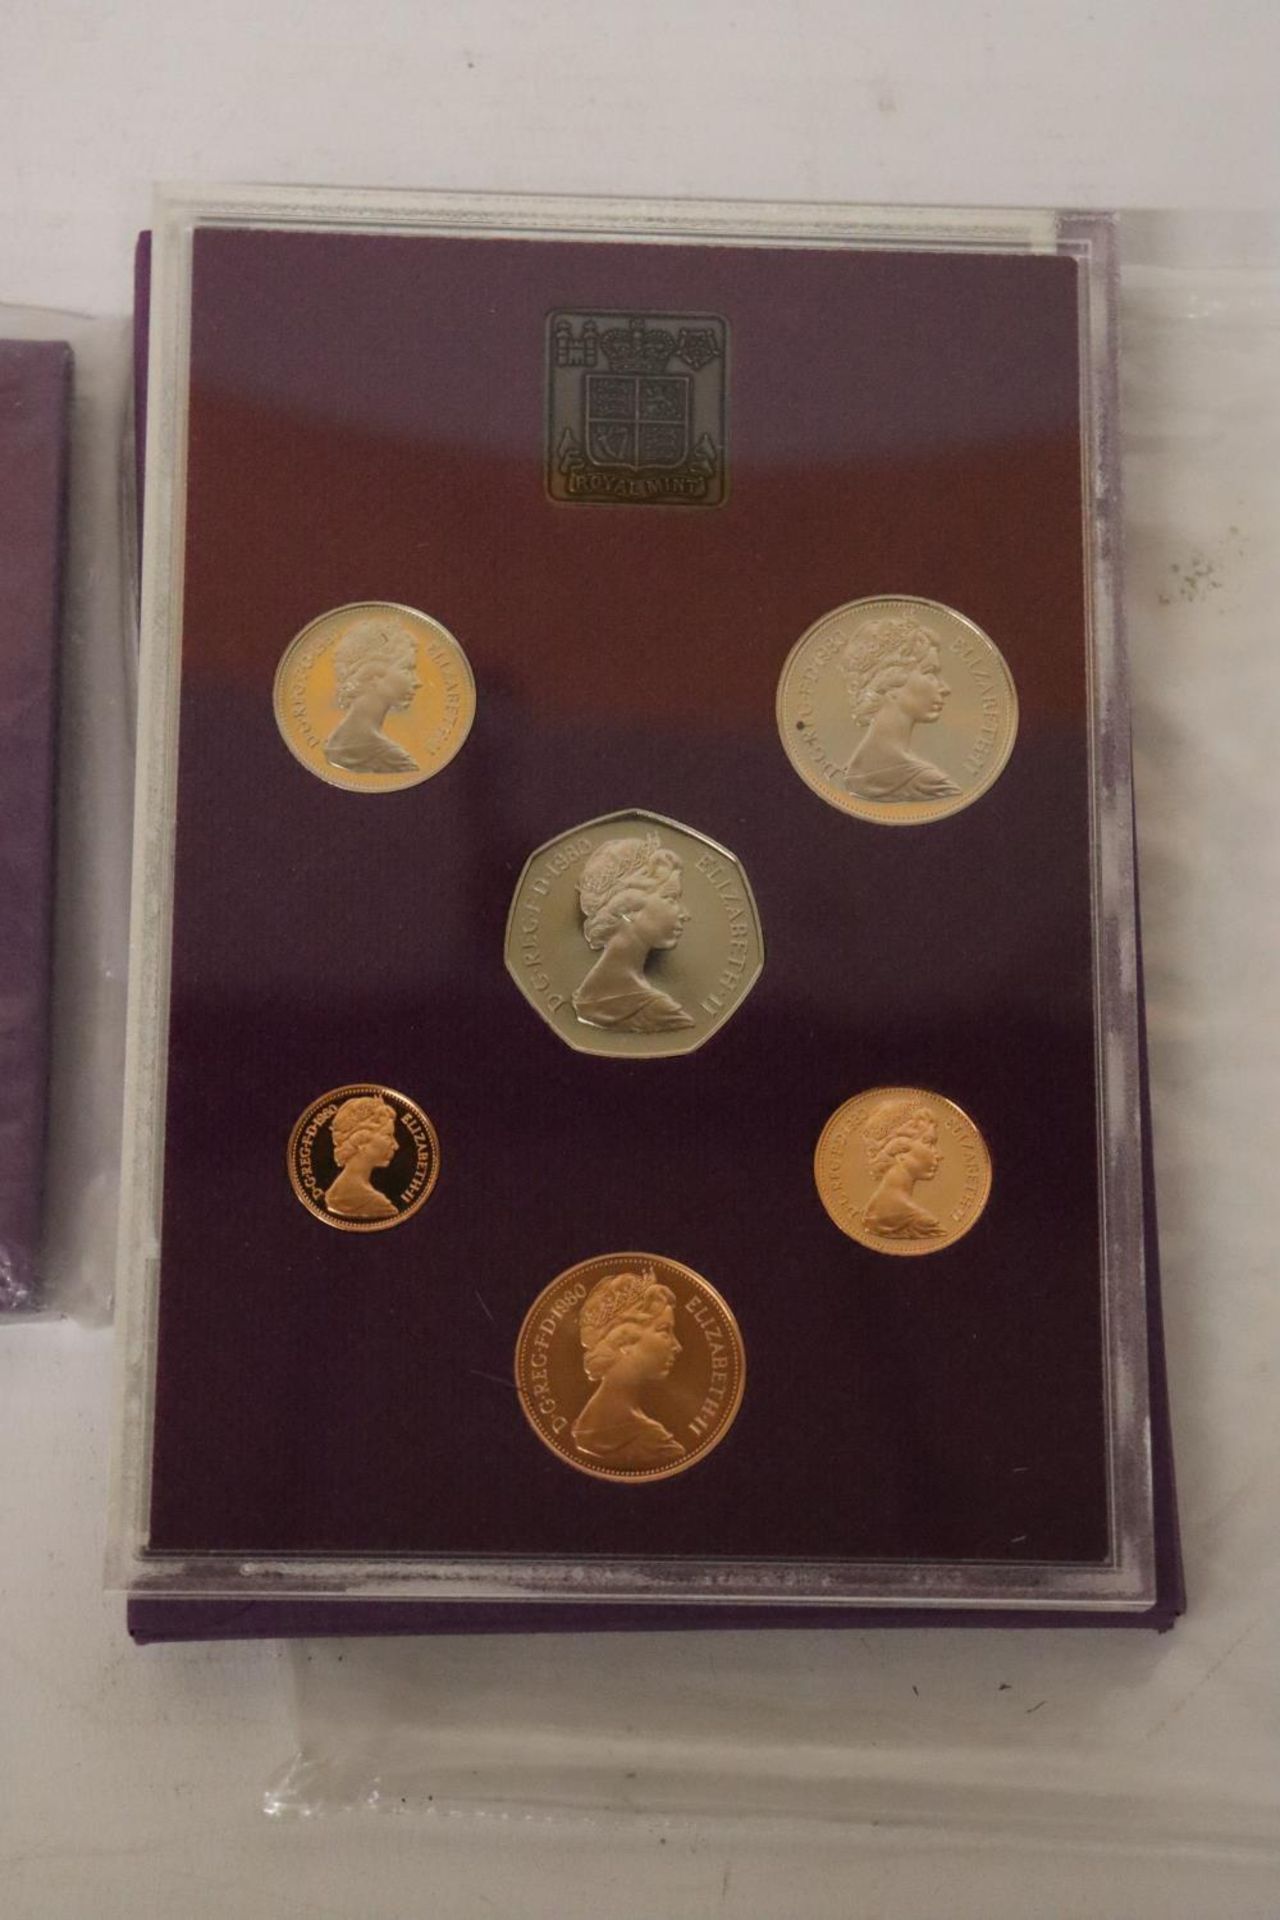 UK & NI 2 X ’80 AND 4 X ’81 YEAR PACKS OF COINS CONTAINED IN ENVELOPE - Image 3 of 3